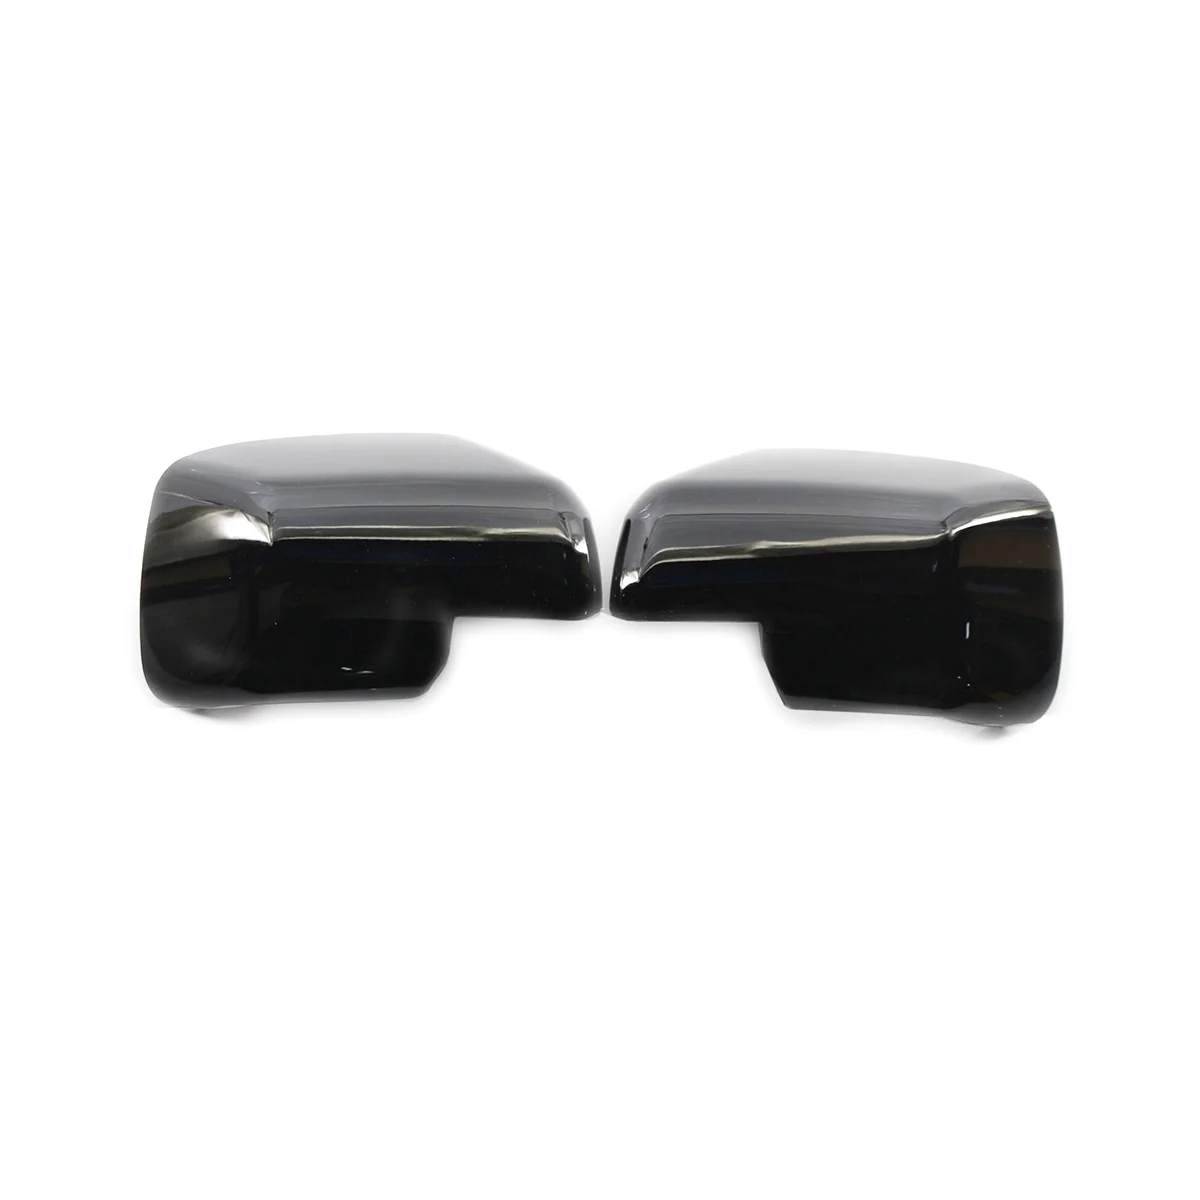 

Car Glossy Black Rearview Side Mirror Covers Cap for Land Rover Discovery 3 Freelander 2 2004-2009 Car Accessories